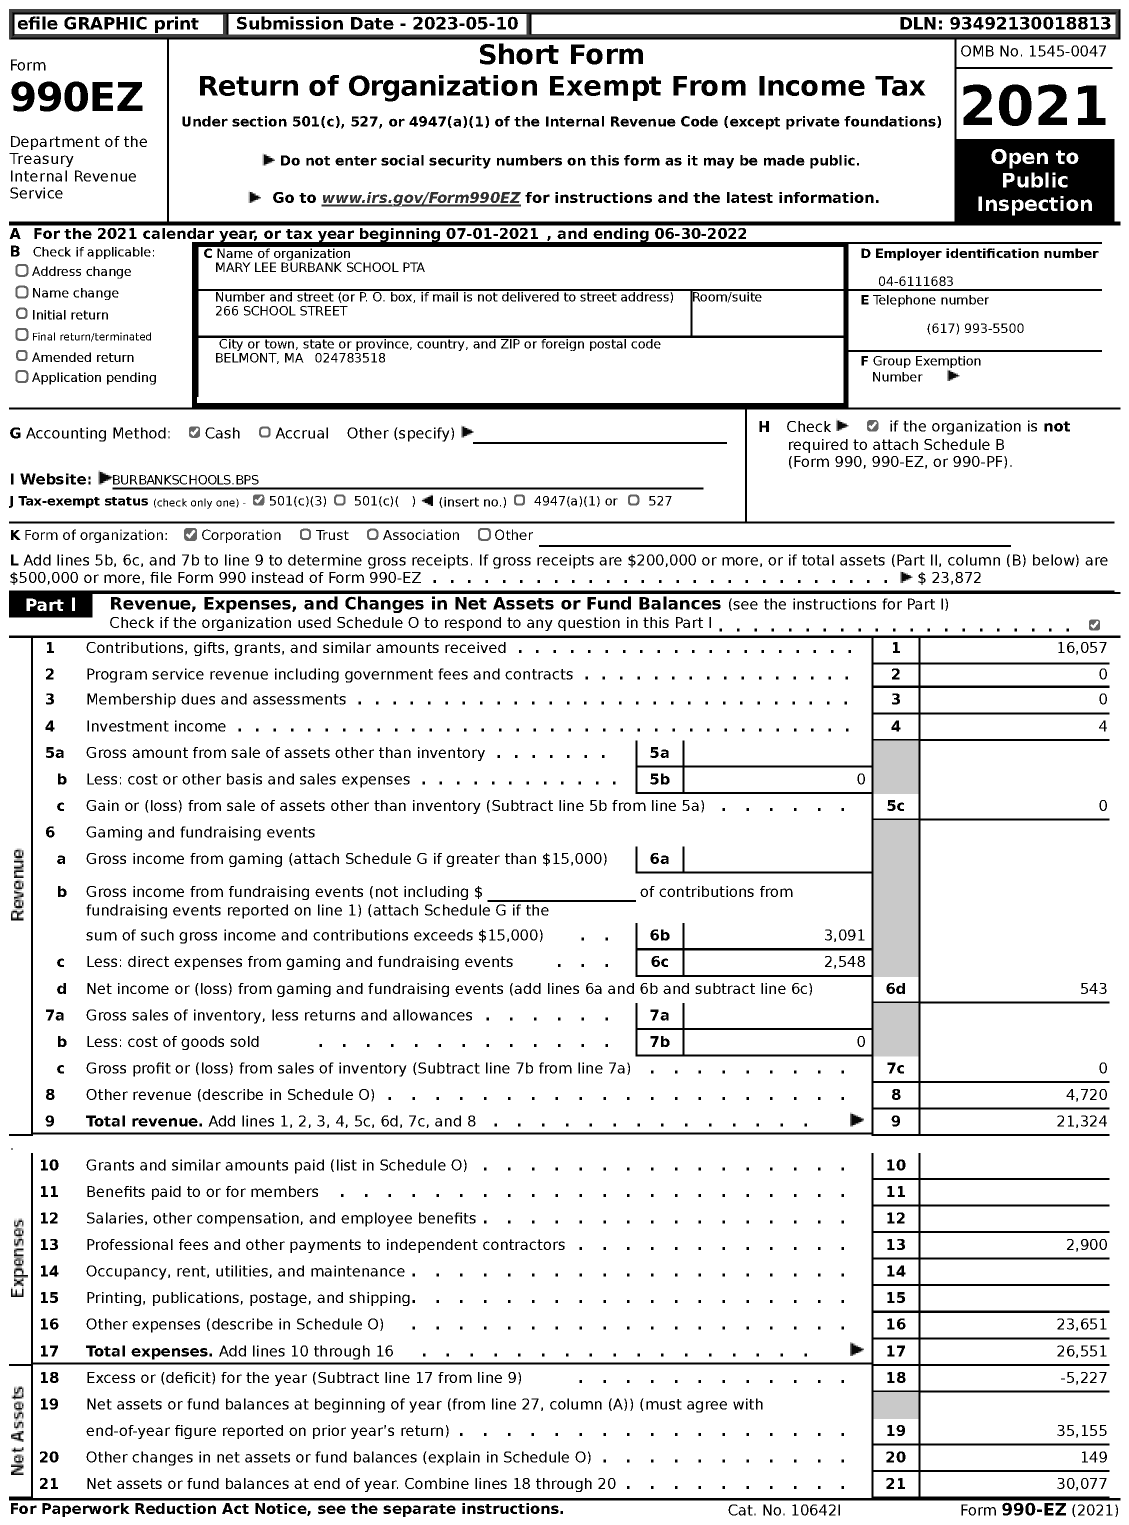 Image of first page of 2021 Form 990EZ for Mary Lee Burbank School PTA